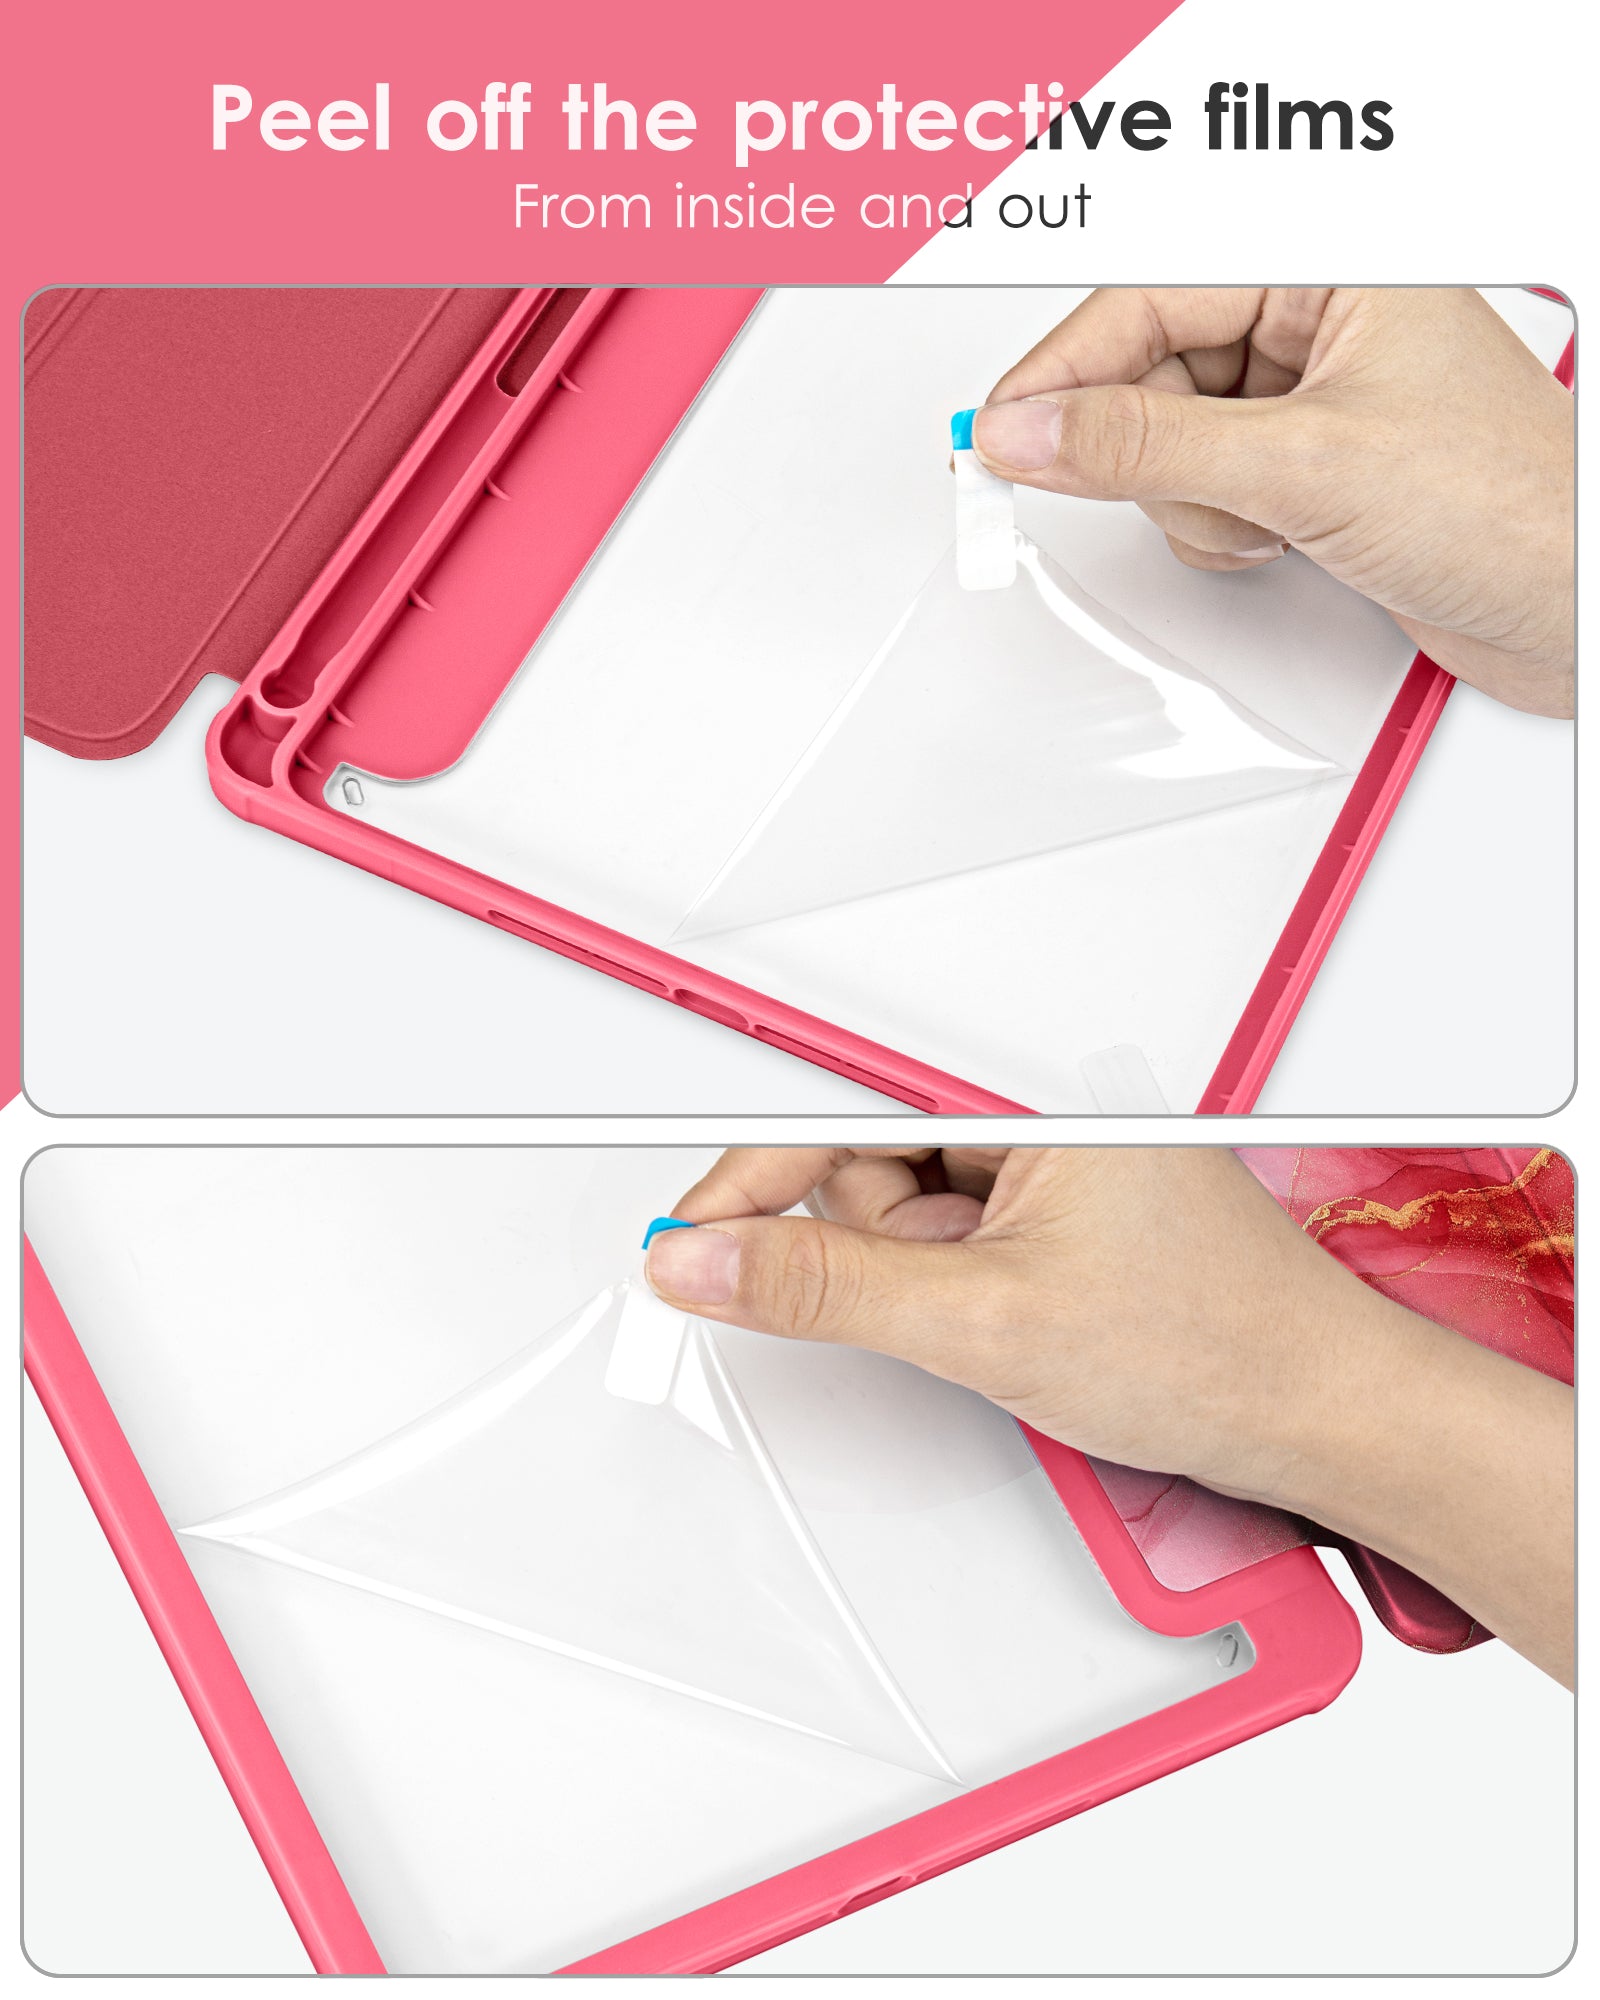 DTTOCASE for iPad 6th / 5th Generation 9.7 inch Case (2018/2017), iPad Air 2 & 1 (2014/2013) Case, Clear Back, Smart Cover [Built-in Pencil Holder, Auto Sleep/Wake] - Rose Gold